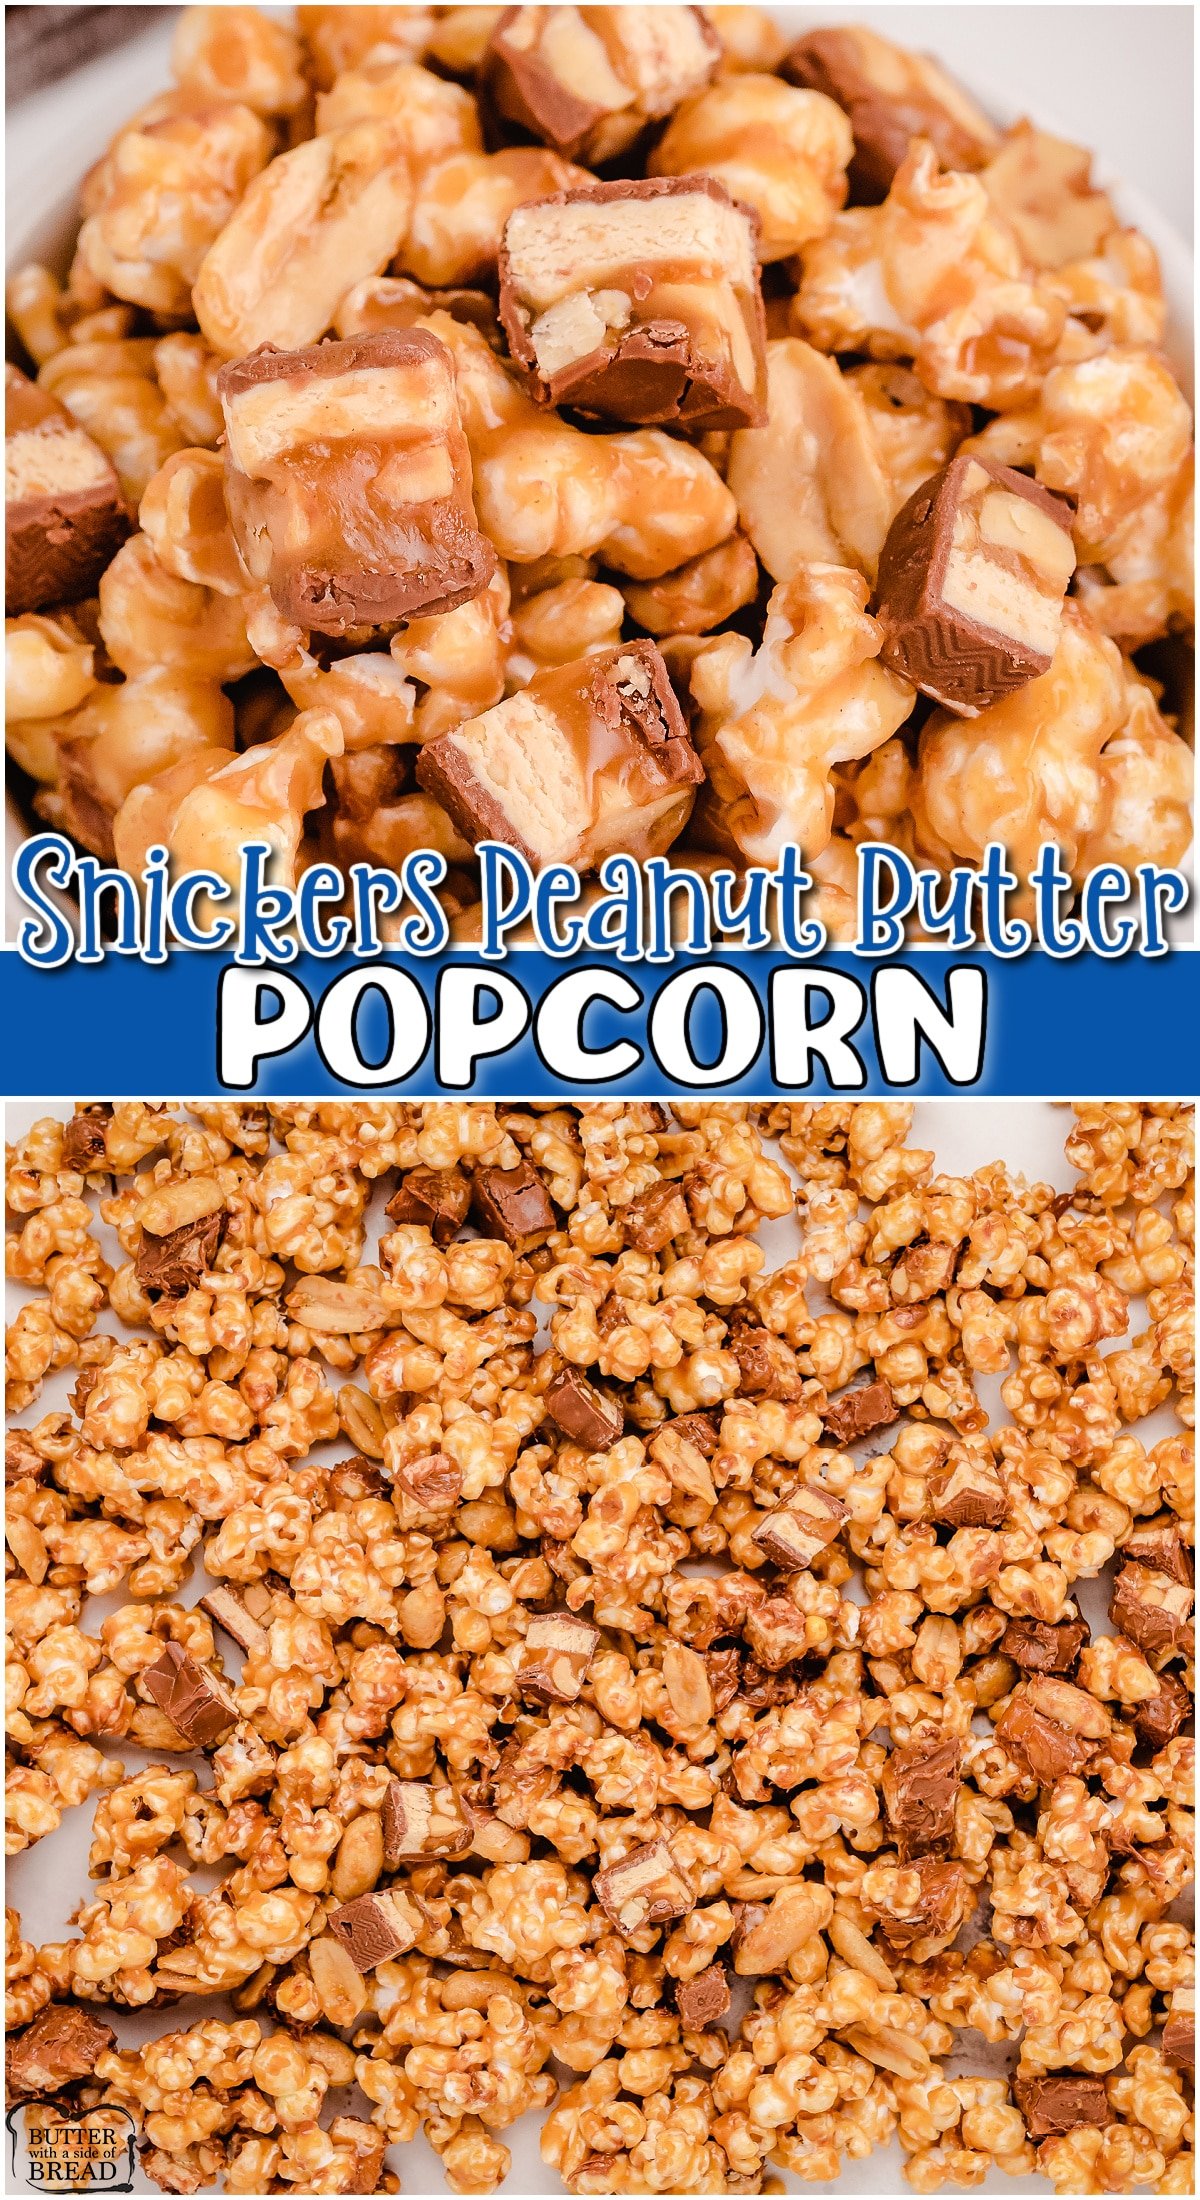 Snickers Peanut Butter Popcorn made with just 5 ingredients in minutes! Everyone goes crazy over this salty-sweet peanut butter, chocolate & caramel popcorn!